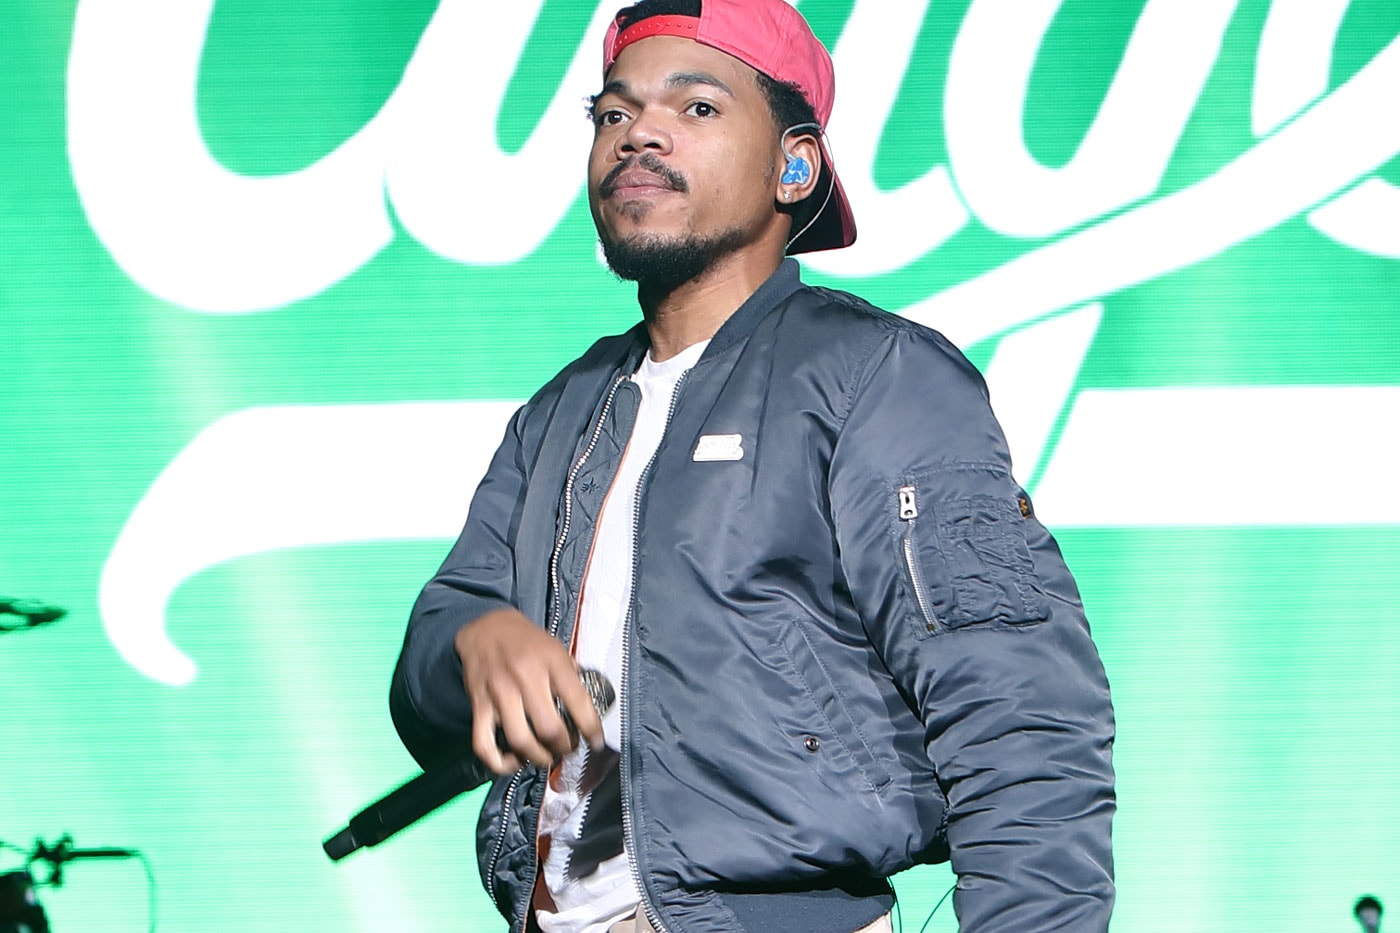 Chance the Rapper Joins Supa Bwe For Animated "Fool Wit It" Video